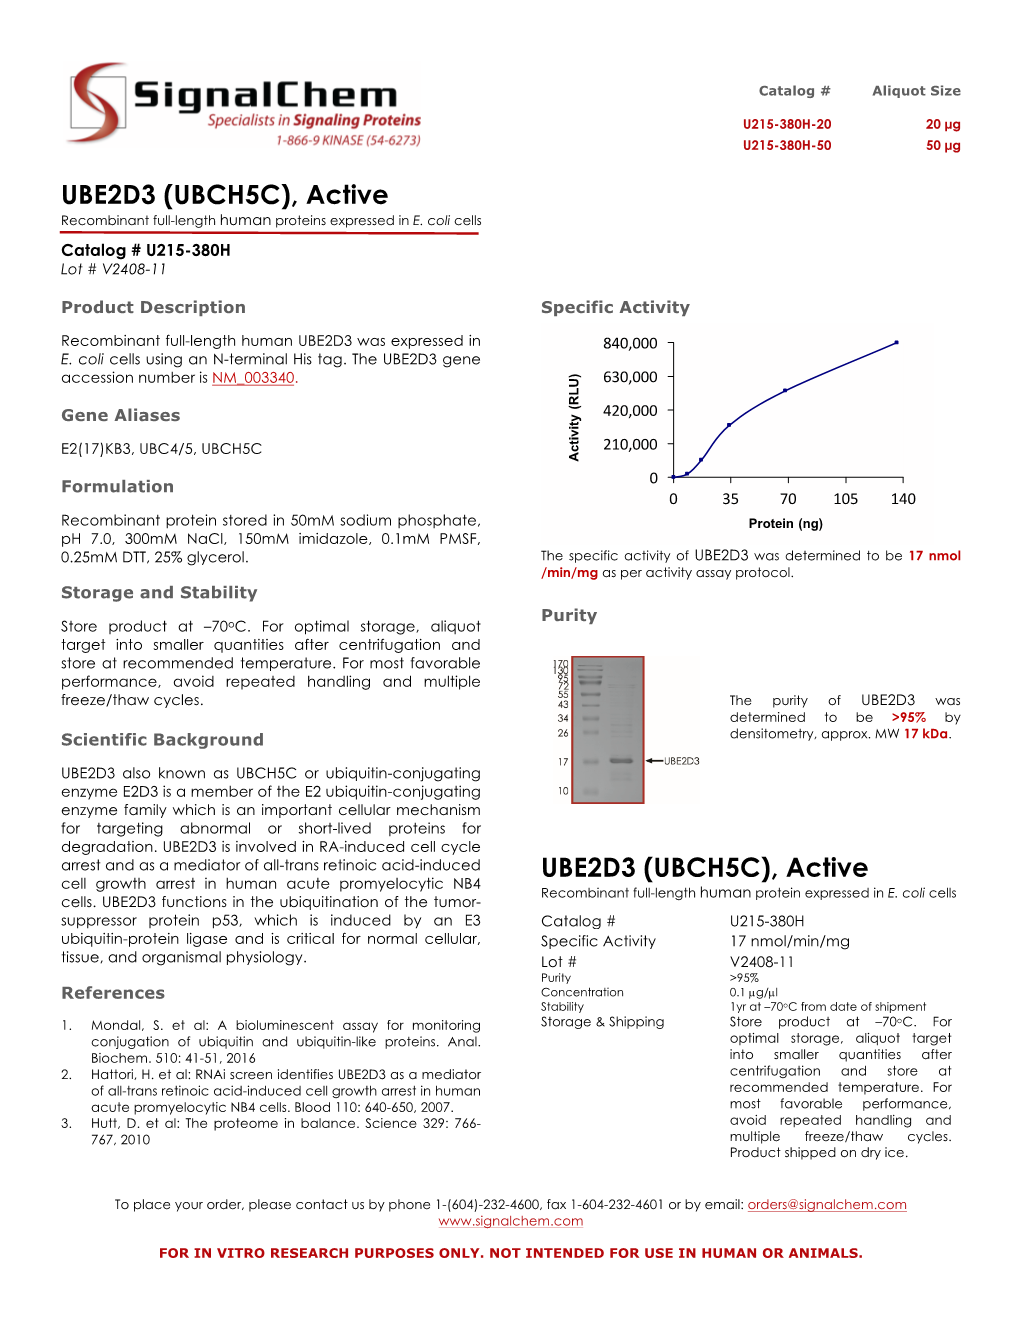 UBE2D3 (UBCH5C), Active Recombinant Full-Length Human Proteins Expressed in E